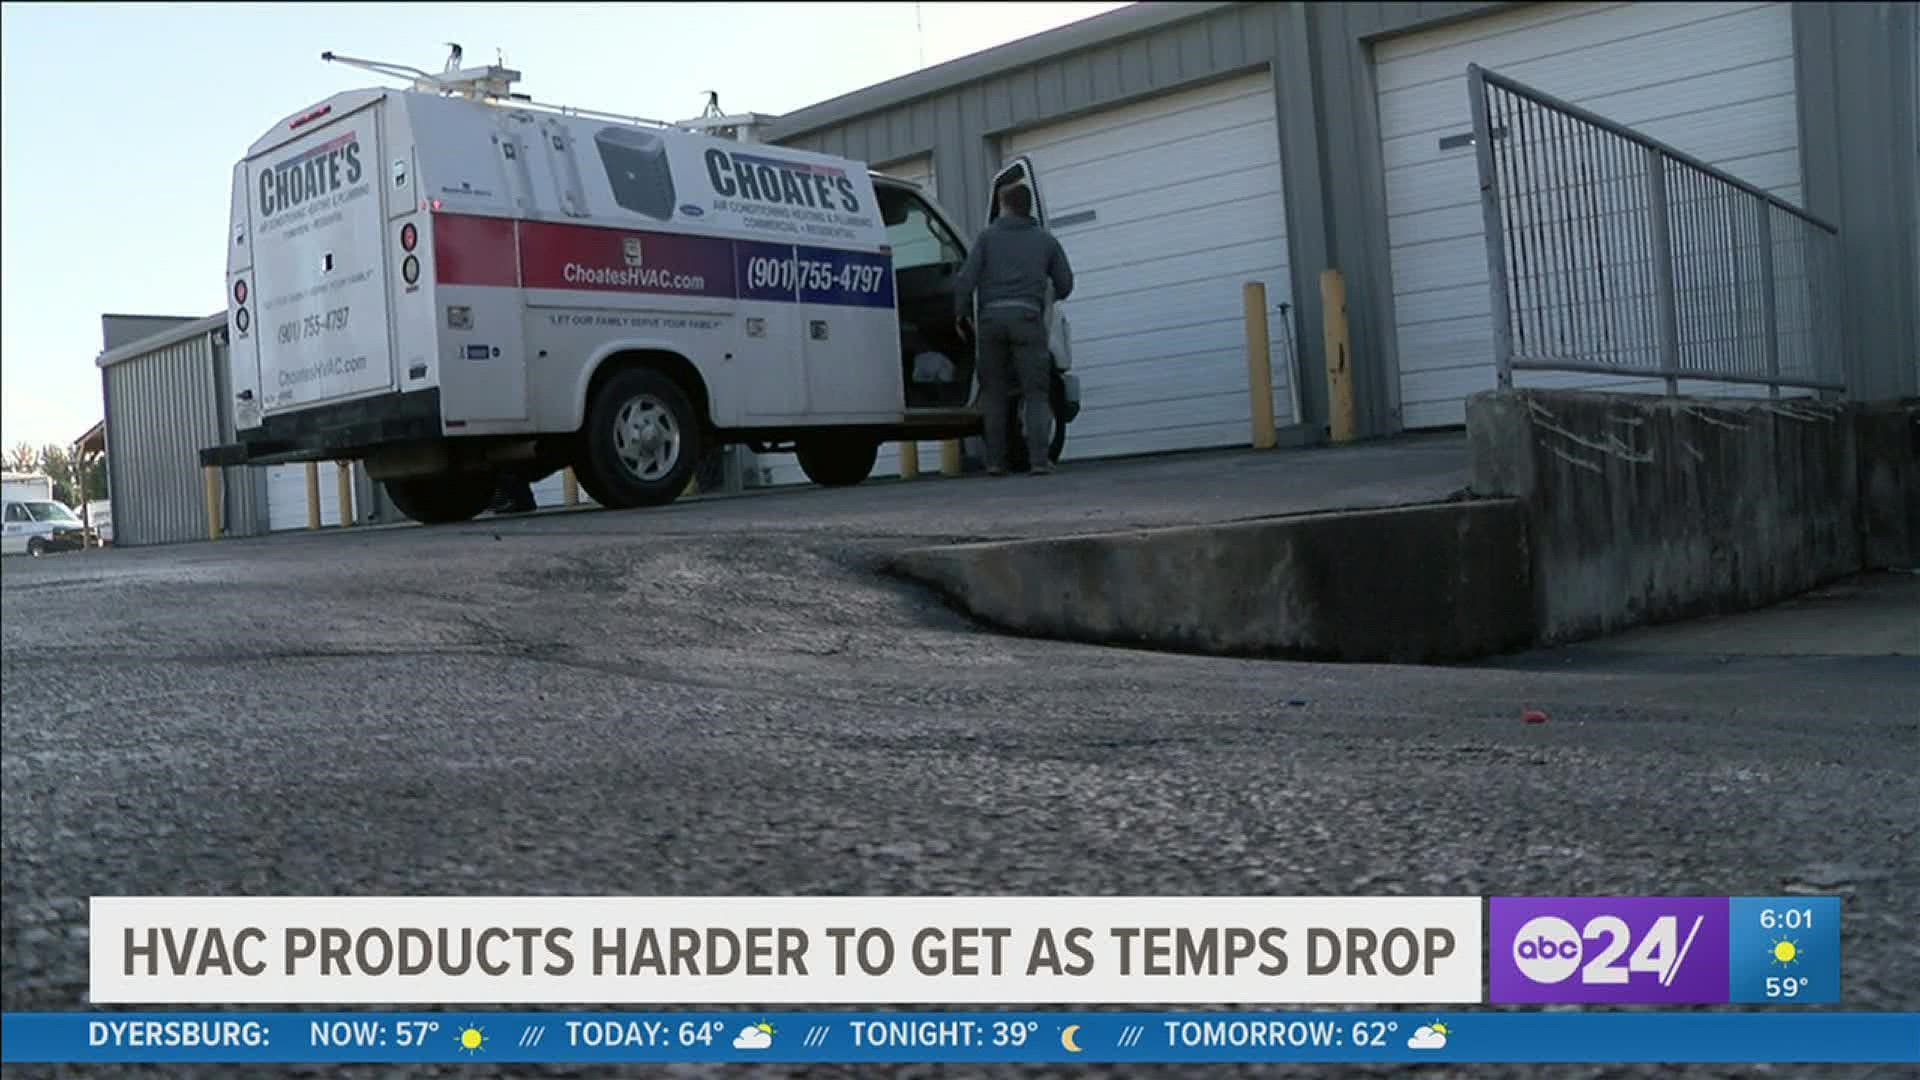 Those at Choate's HVAC and Plumbing report double whammy to ABC24: scarcer available products and surging prices for available items.